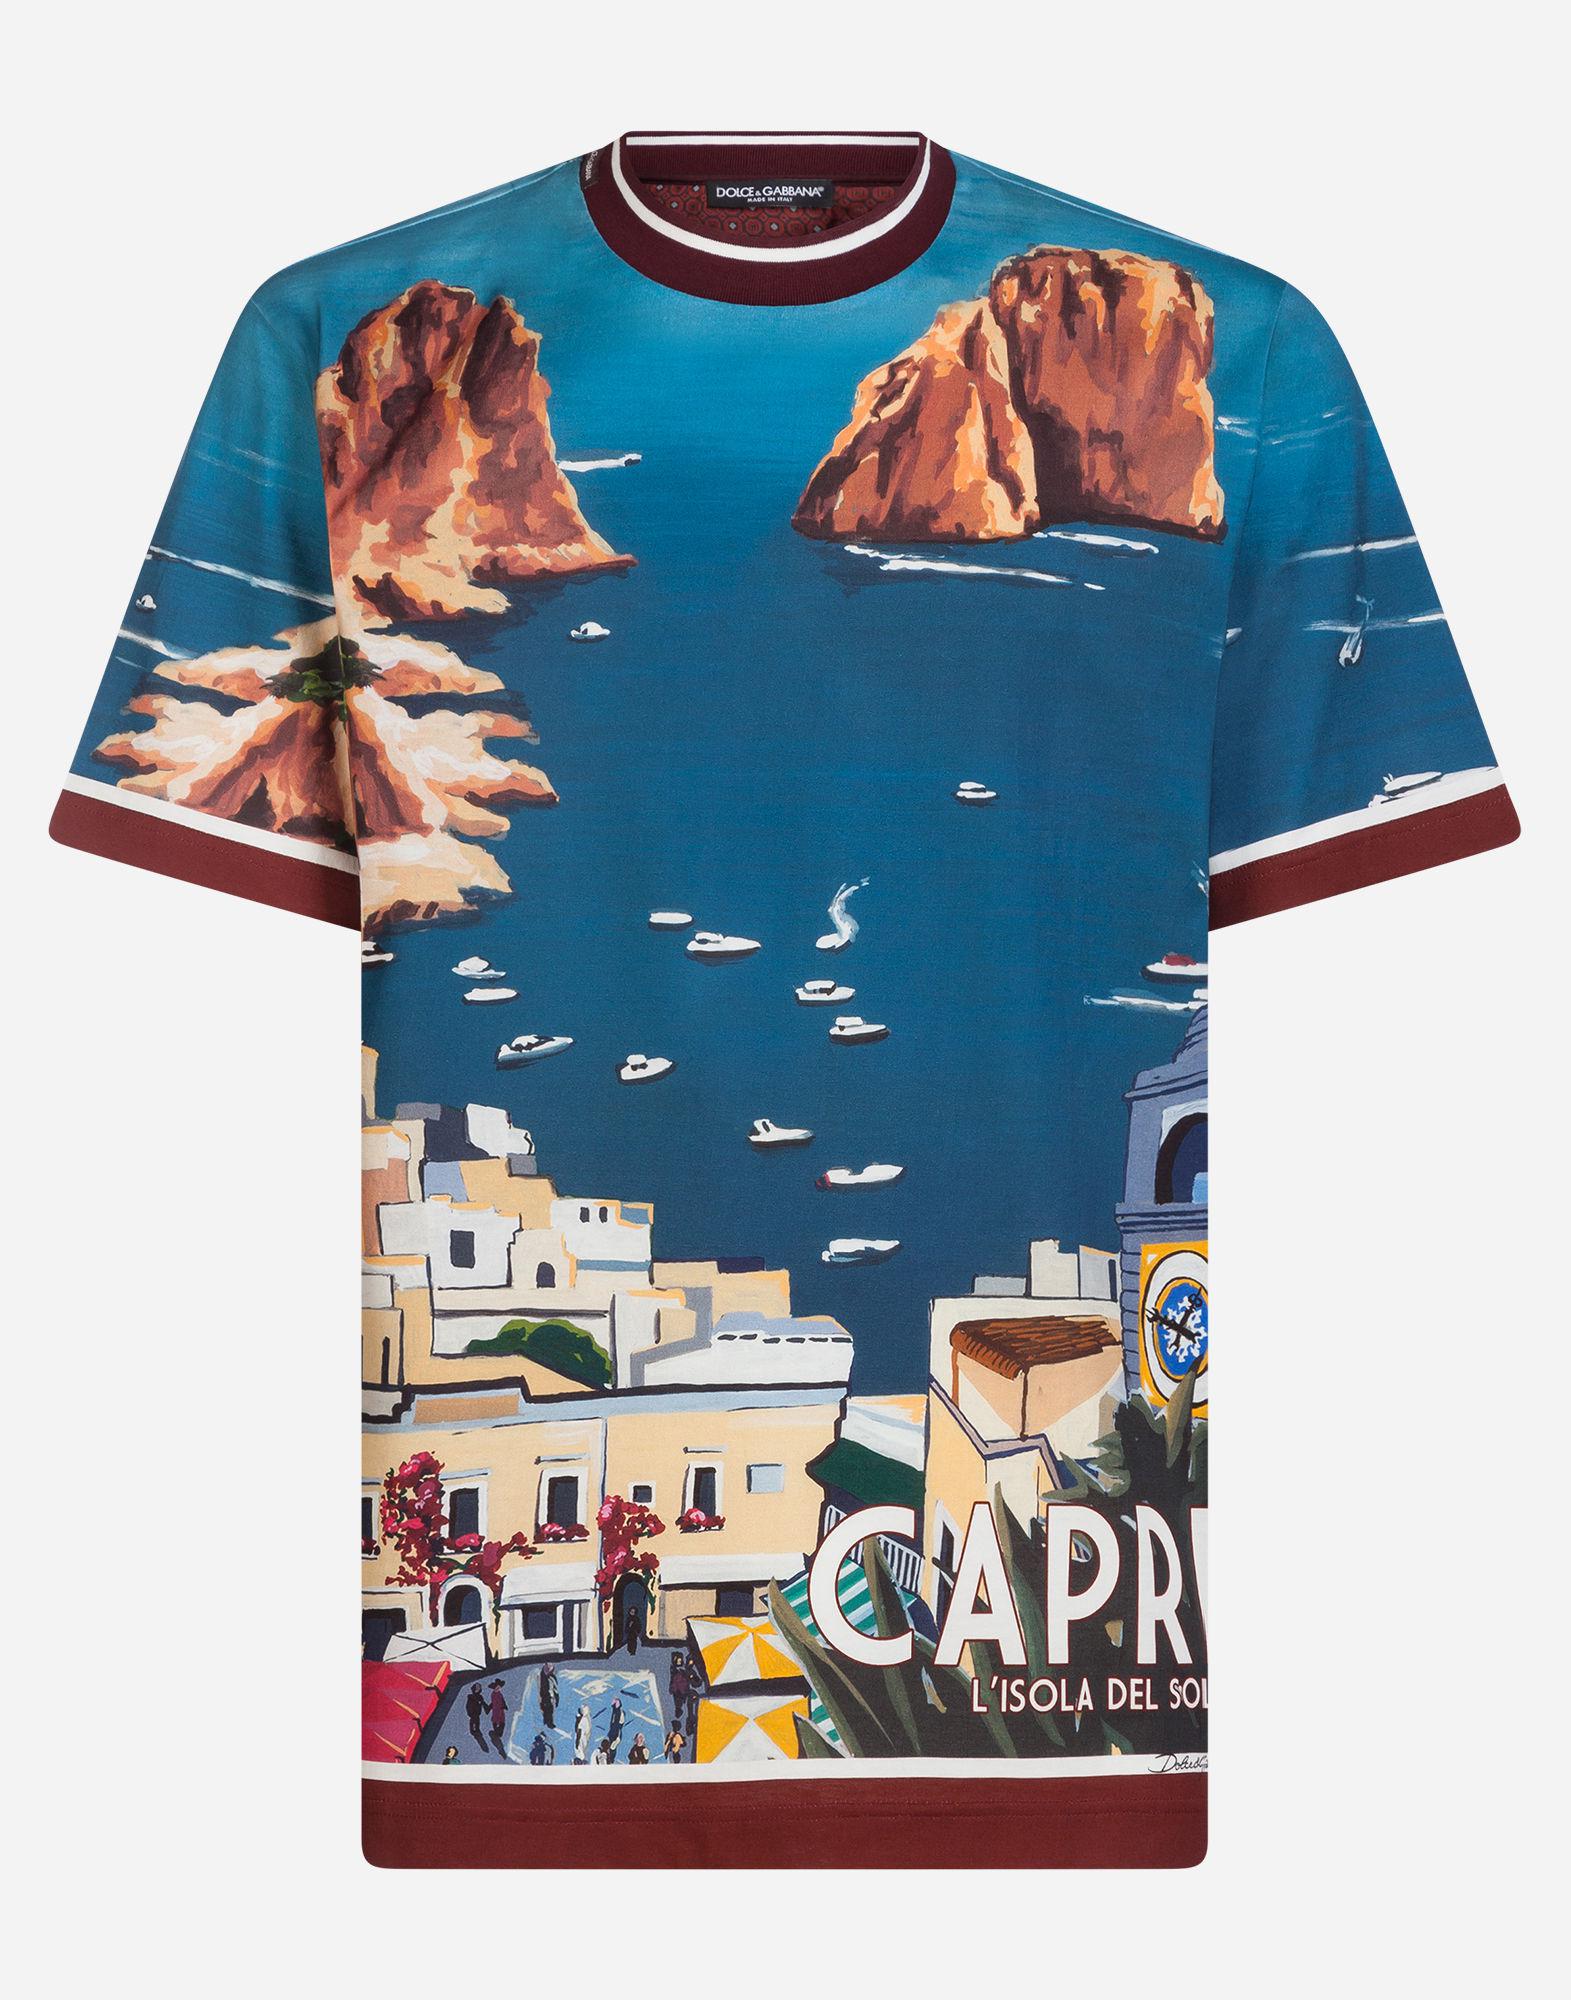 Dolce & Gabbana Printed Cotton T-shirt in Blue for Men - Lyst